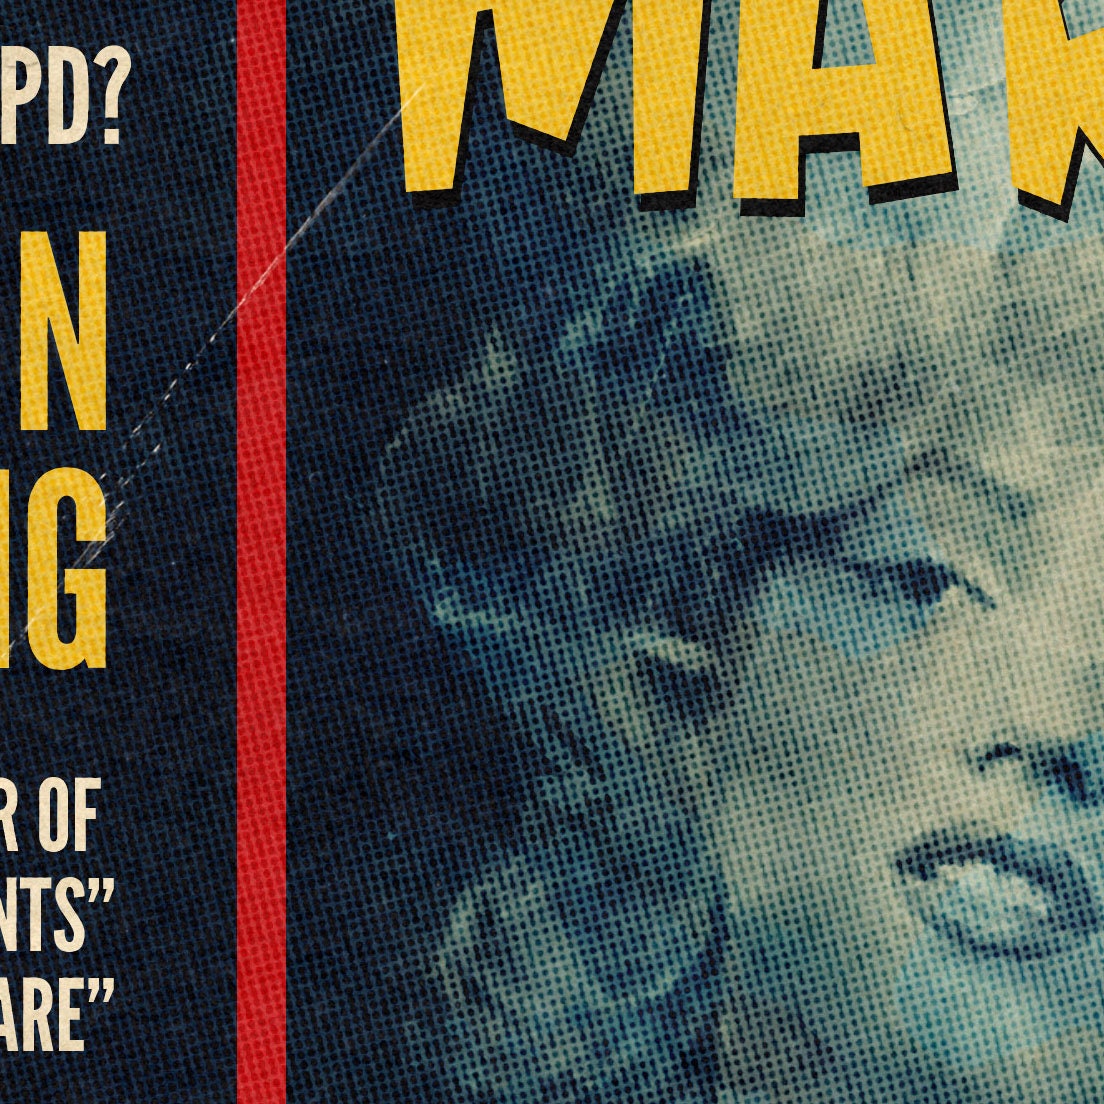 Who Killed Marilyn? Misfits pulp paperback cover | 11x17 Art Print